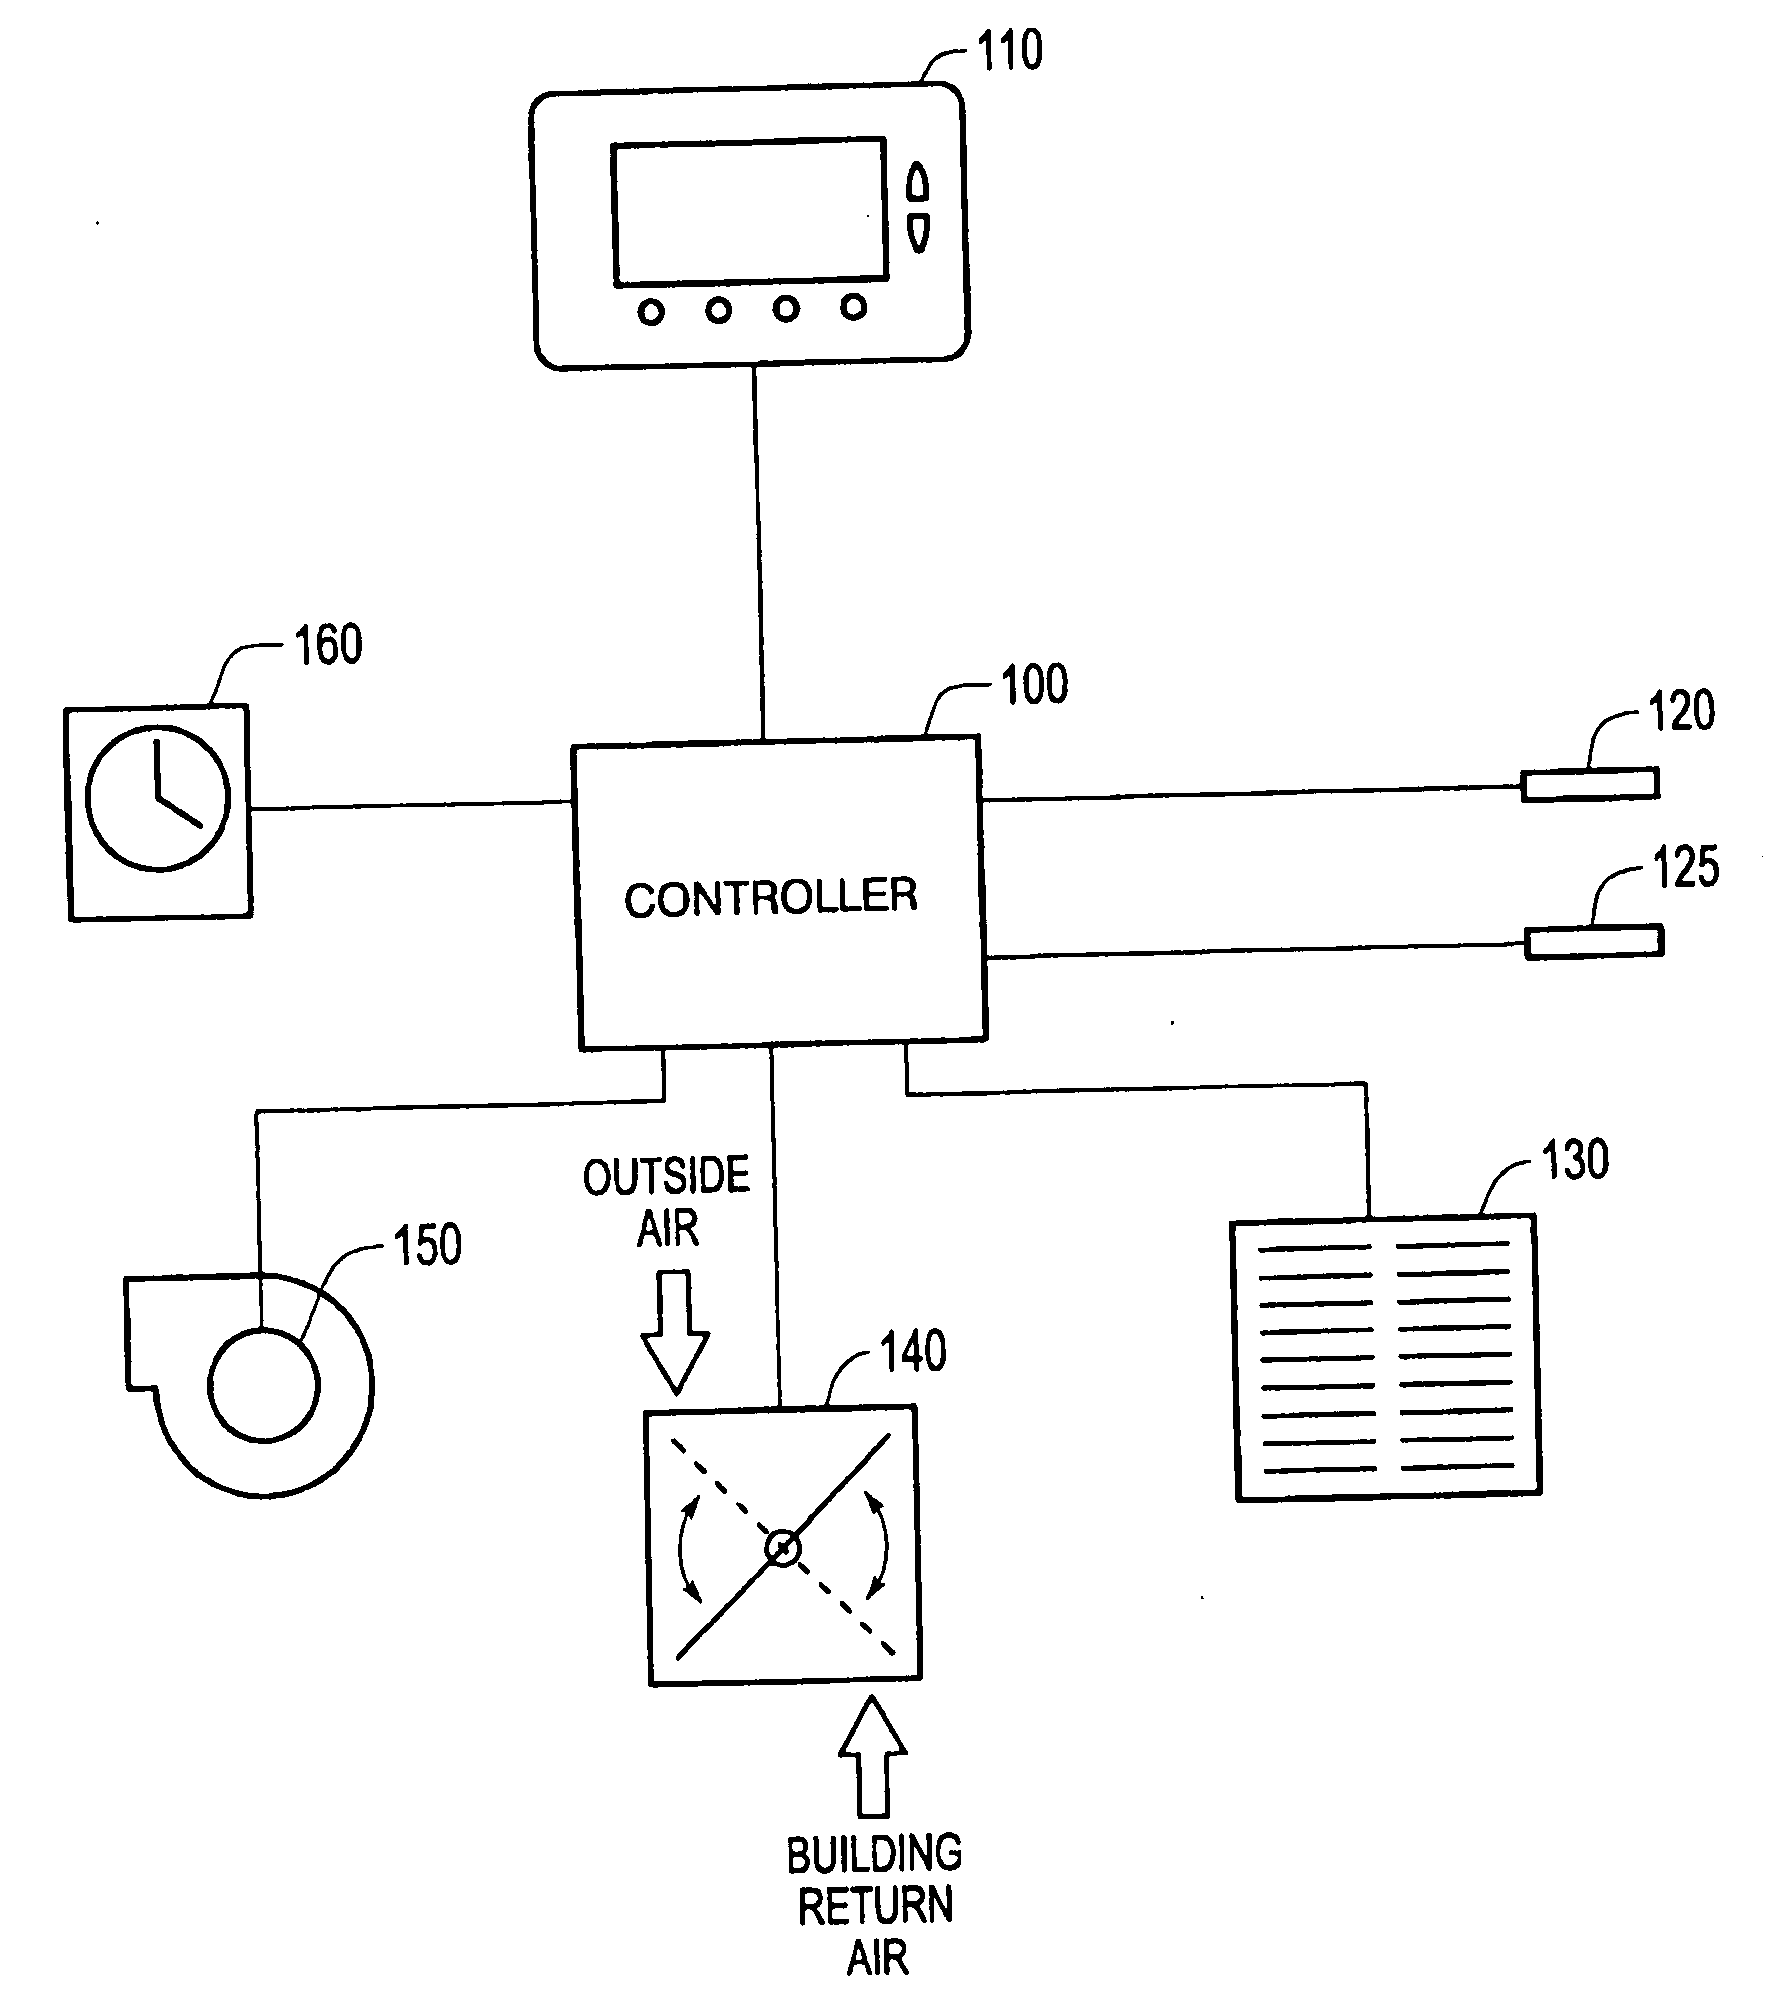 System and method for pre-cooling of buildings